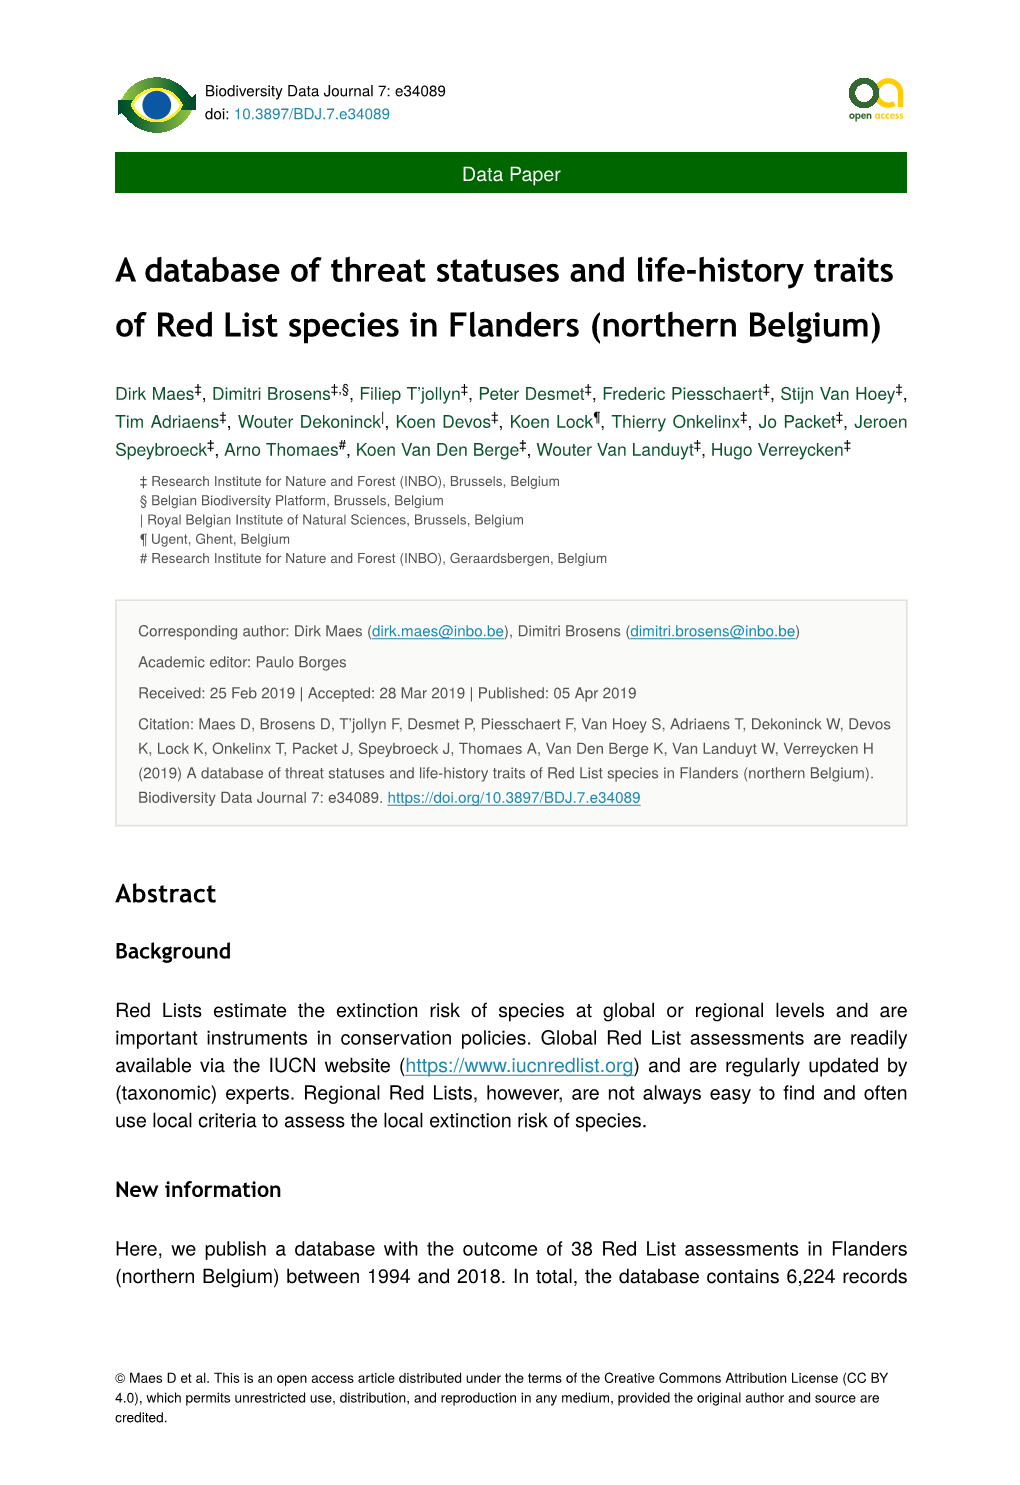 A Database of Threat Statuses and Life-History Traits of Red List Species in Flanders (Northern Belgium)